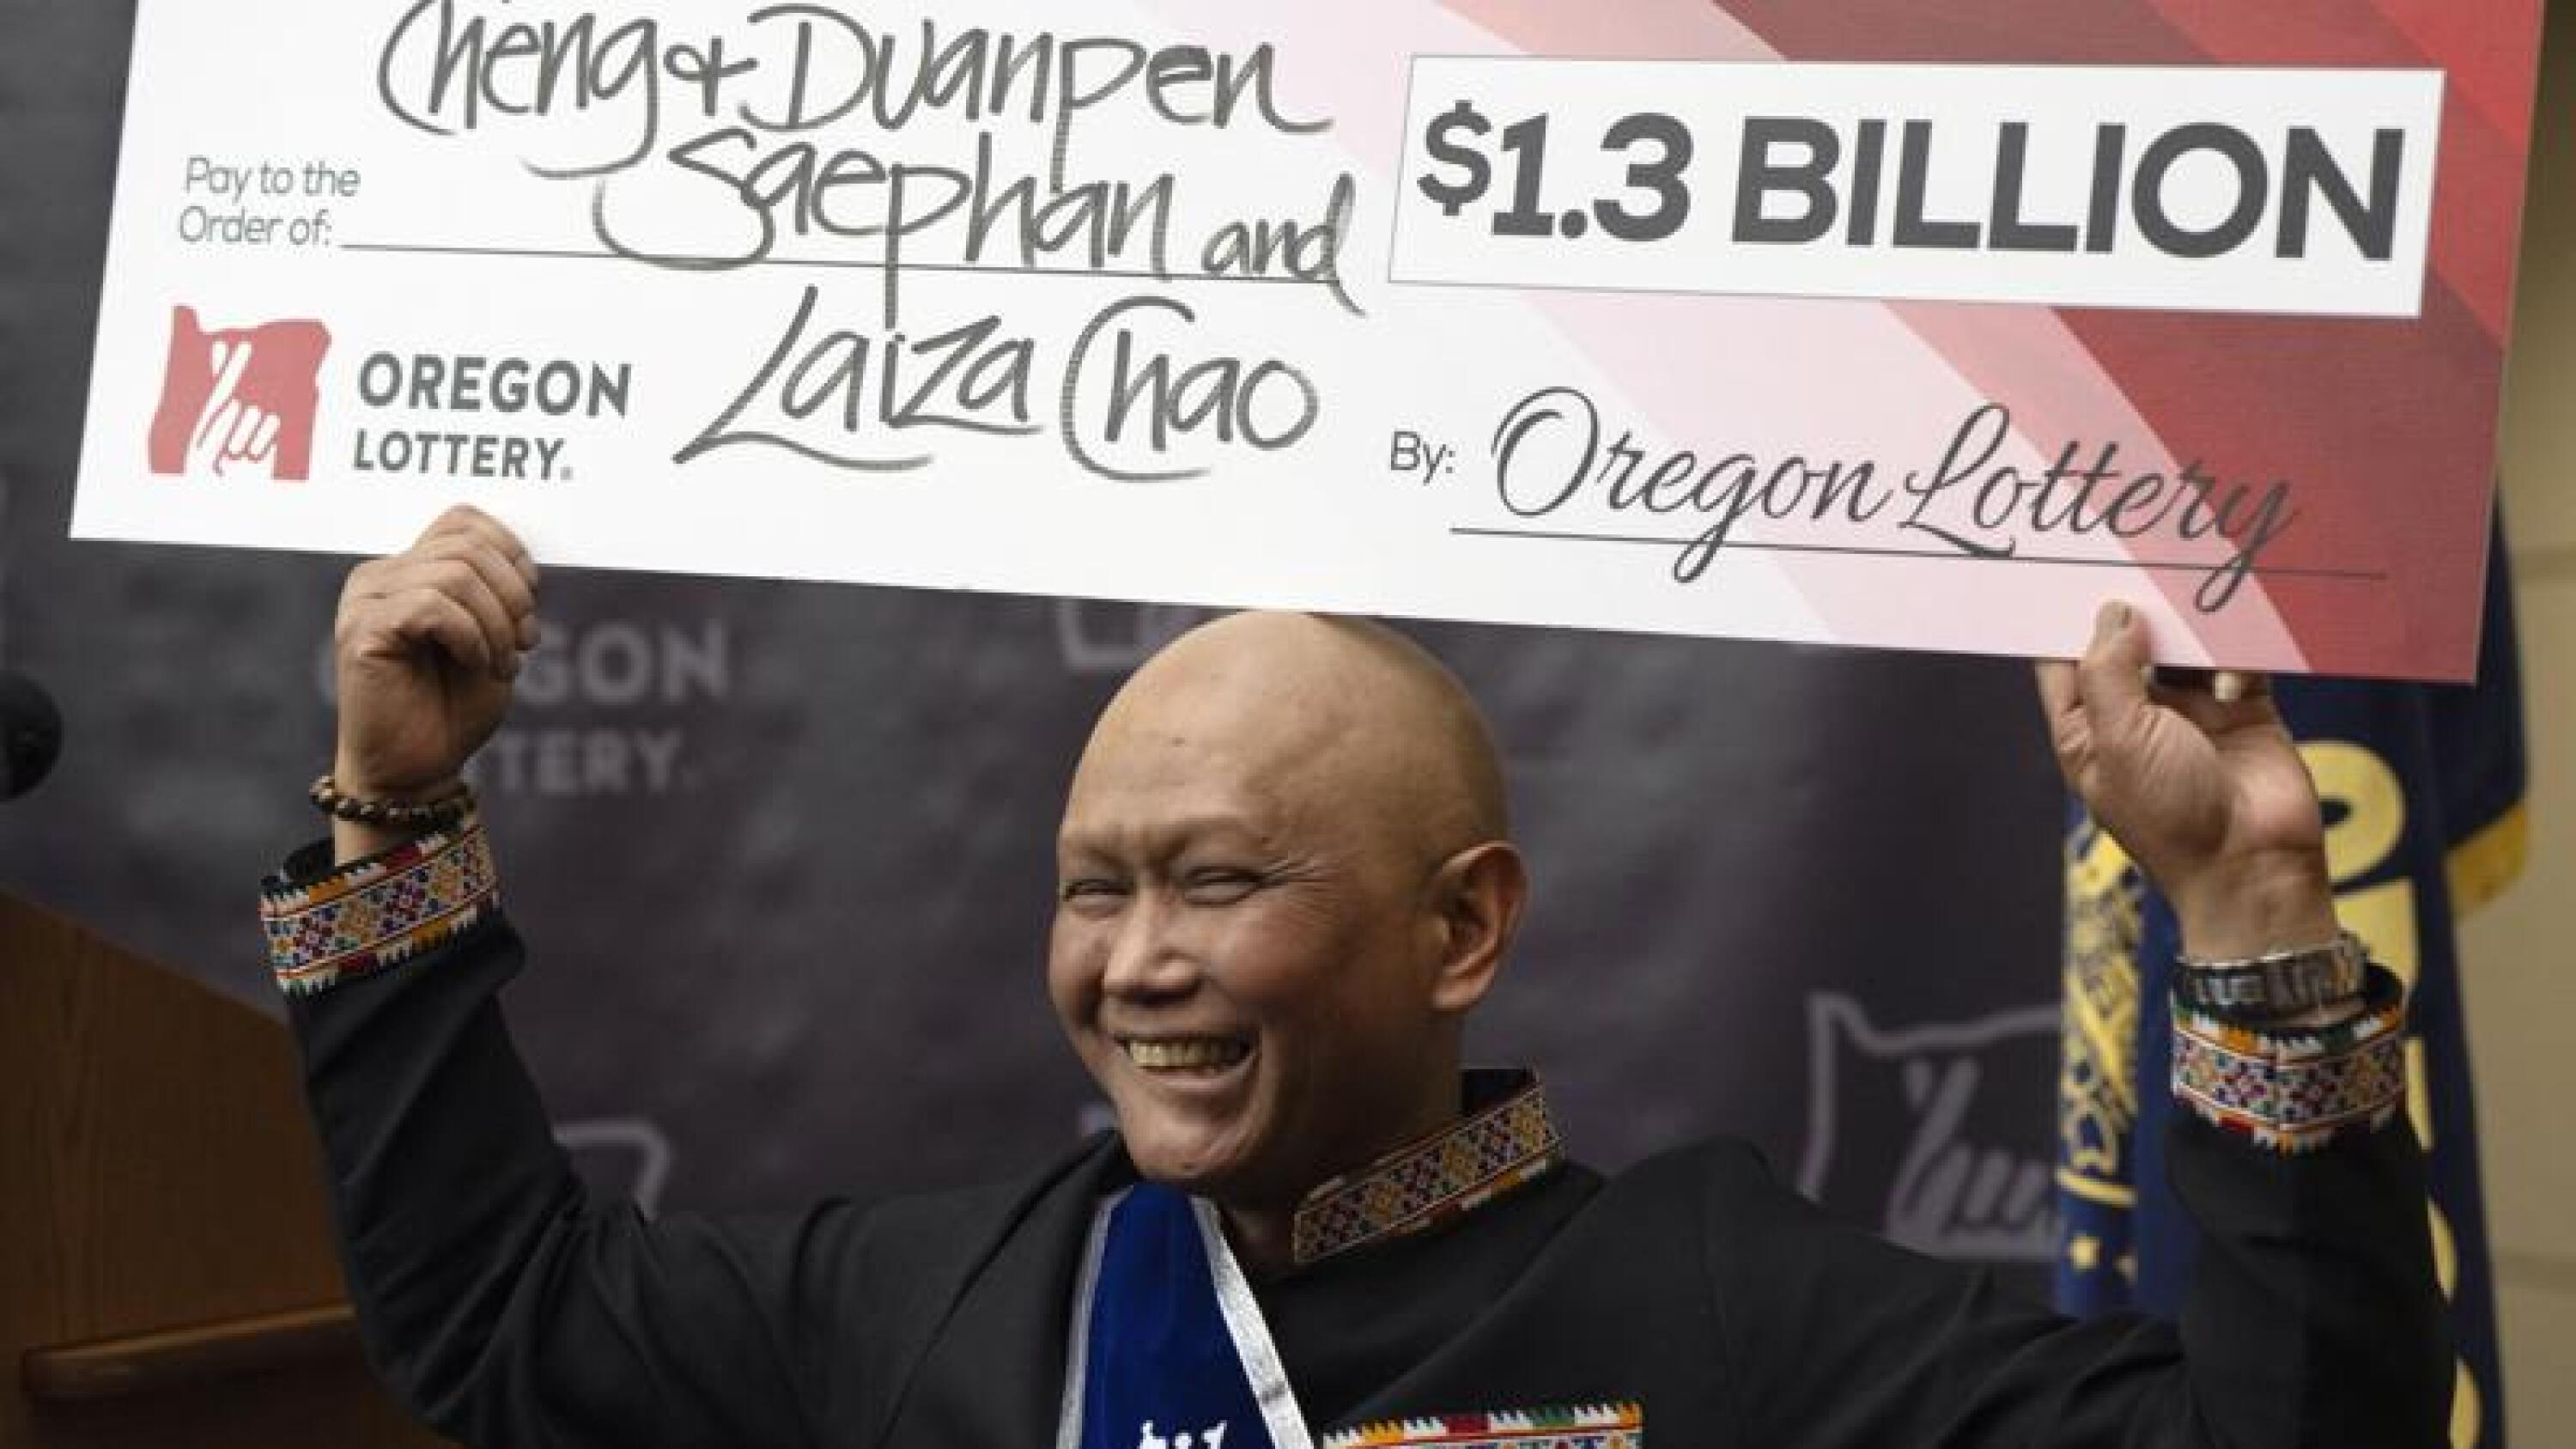 Winner of $1.3 billion Powerball jackpot is immigrant who has cancer